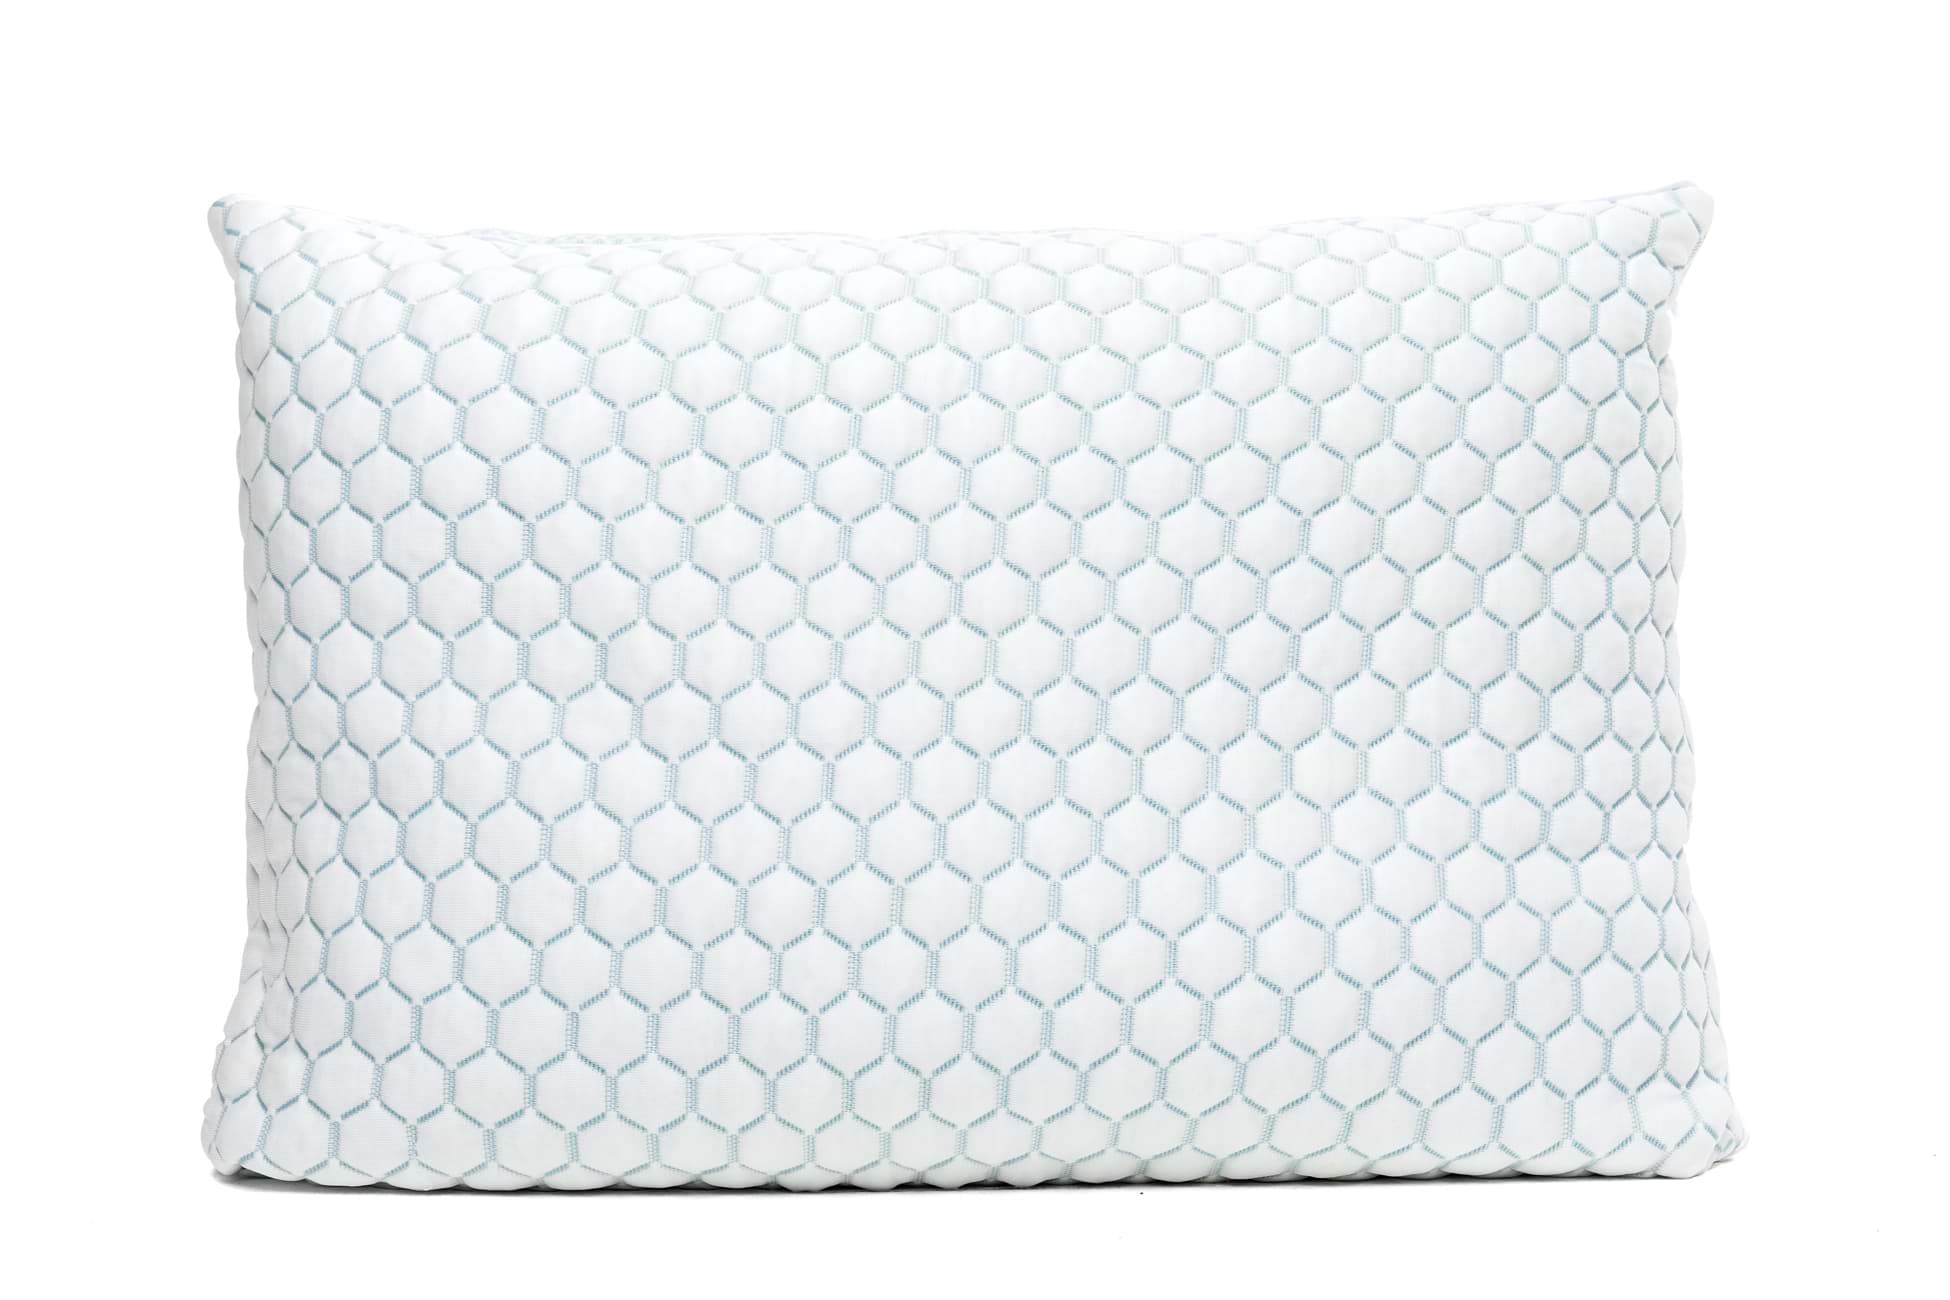 Image of The  Infinity PRO Adjustable Foam Pillow